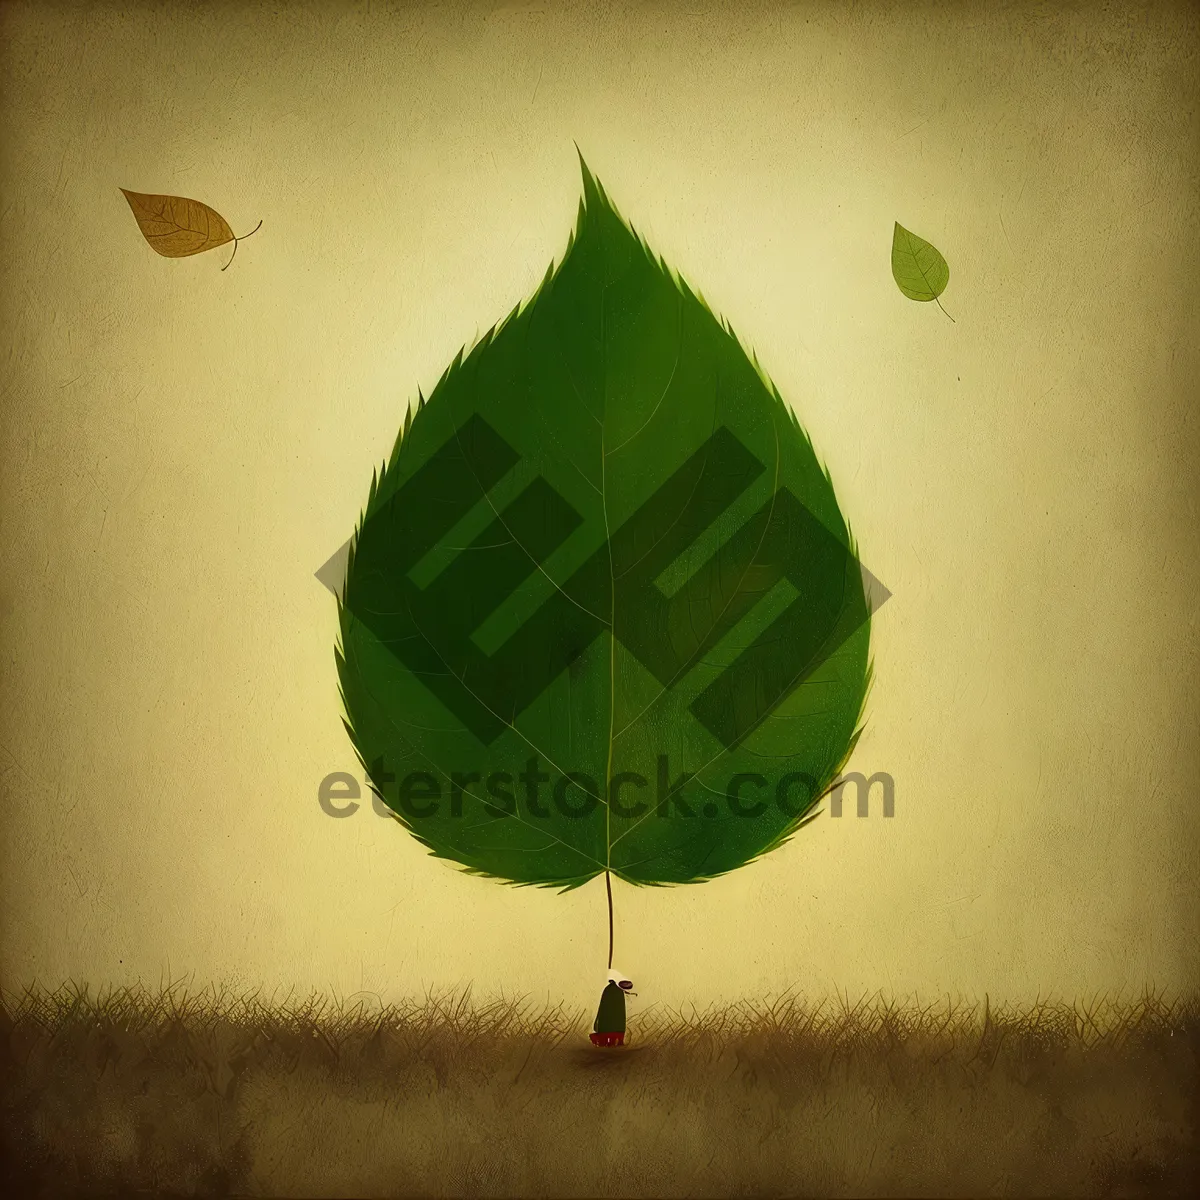 Picture of Wild Ginger Leaf Floating with Balloon Parachute